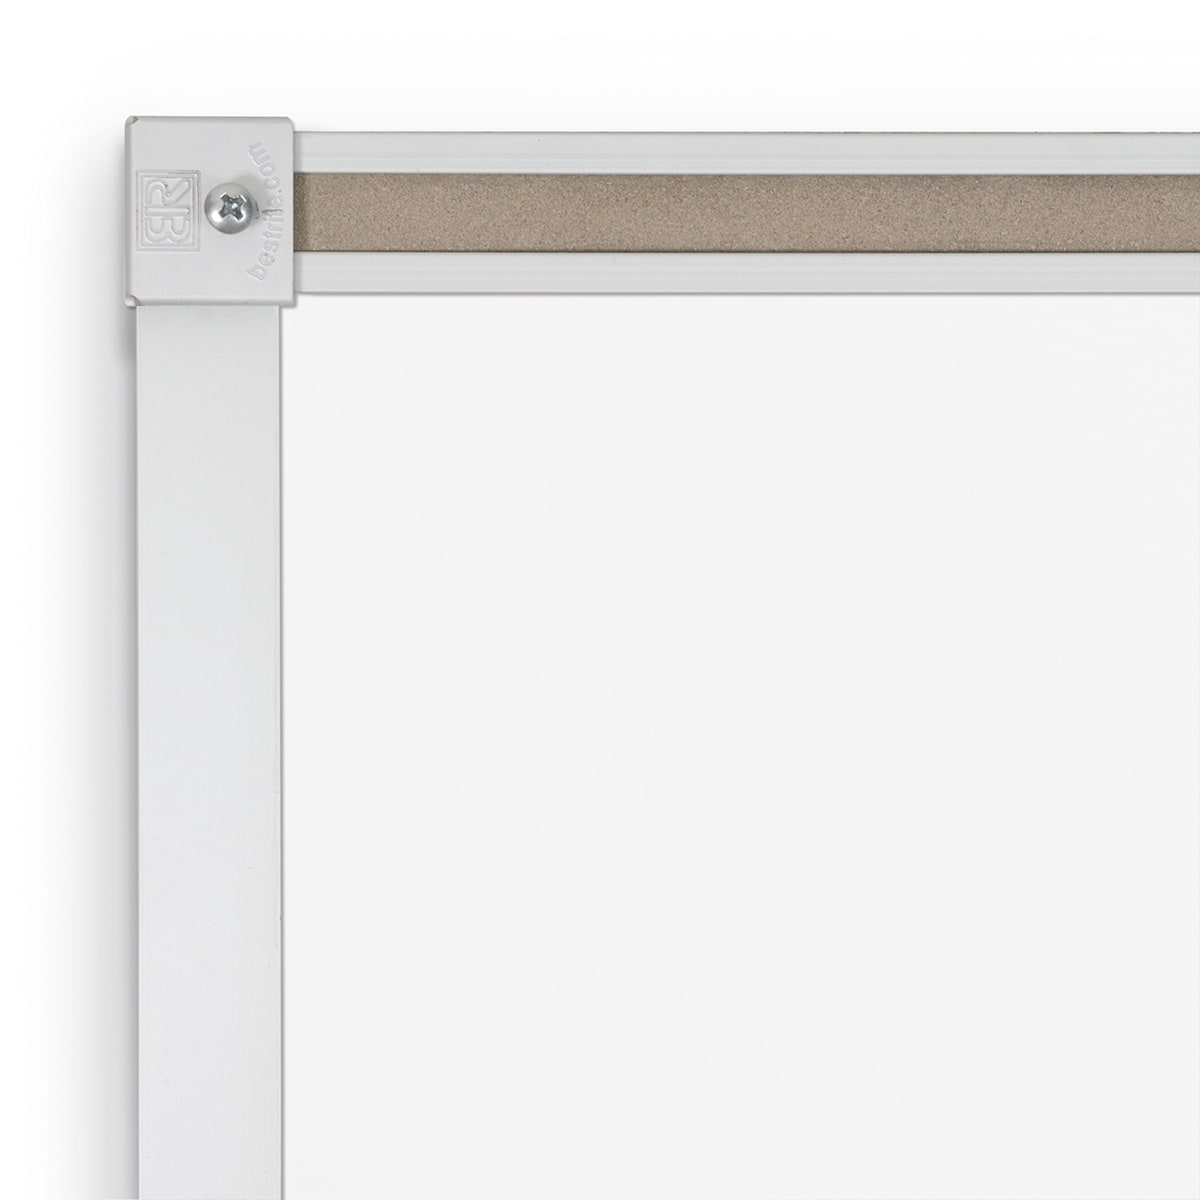 Mooreco ABC Porcelain Magnetic Markerboard with Map Rail - 4'H x 5'W (Mooreco 2H2NF-M) - SchoolOutlet